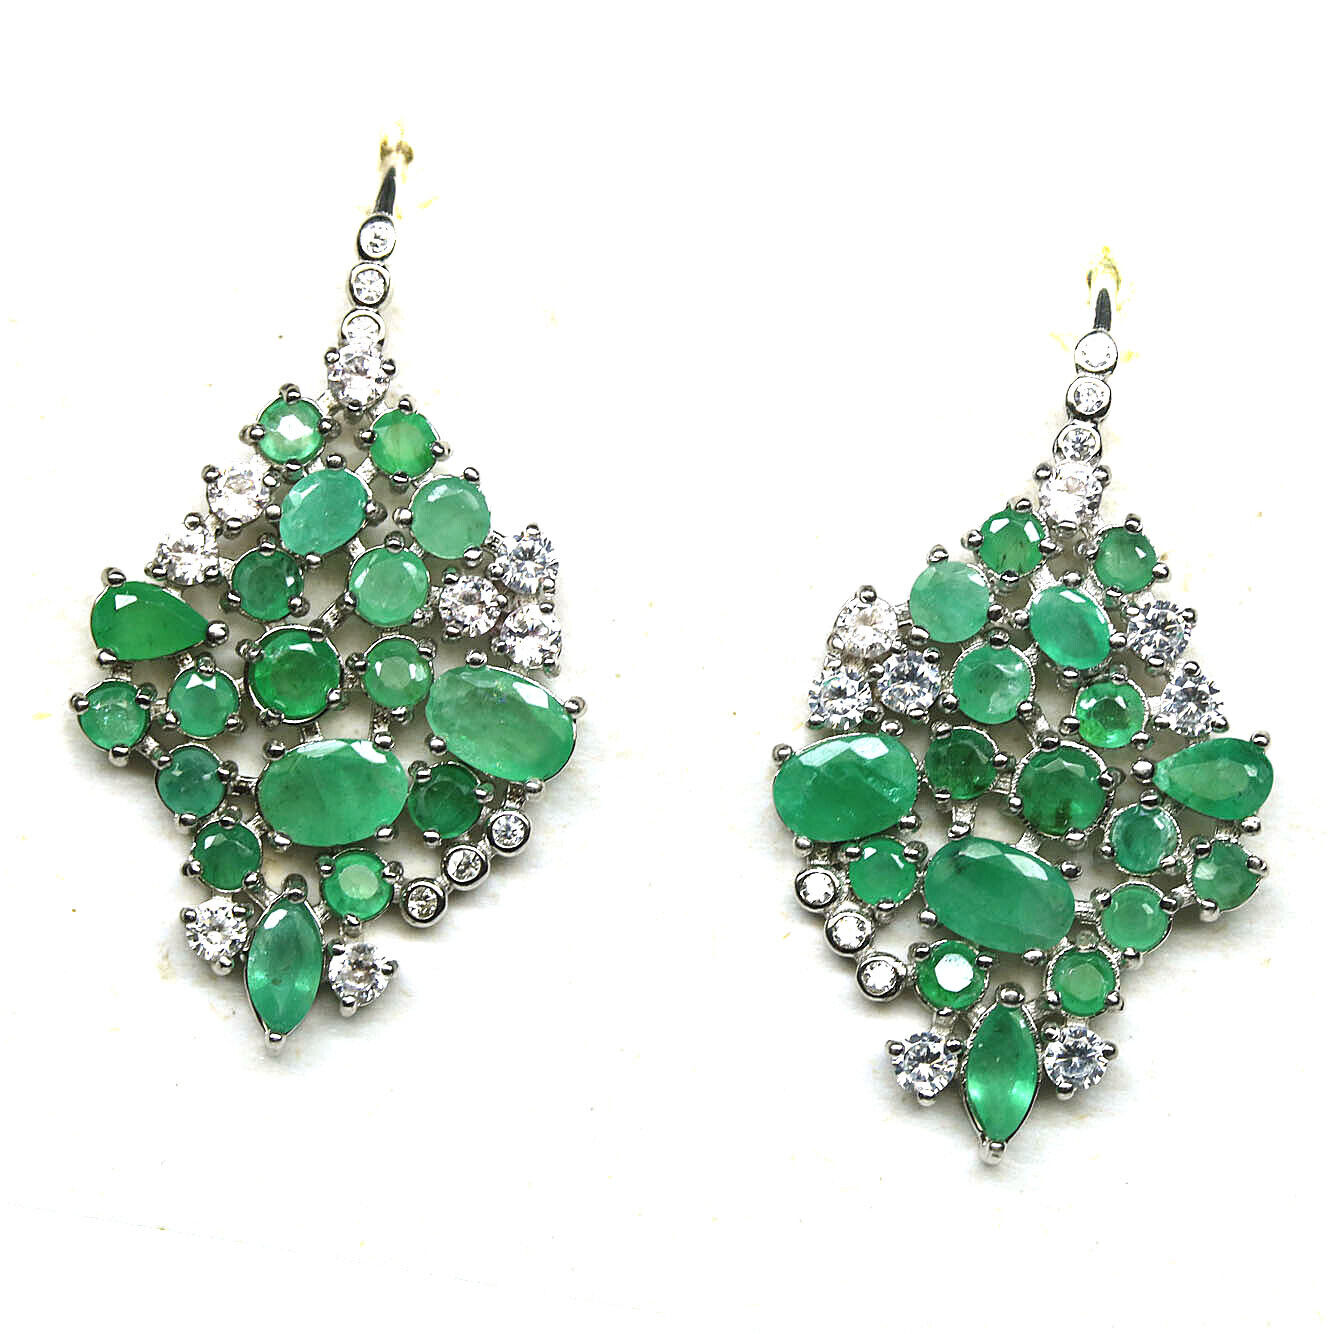 A pair of 925 silver drop earrings set with emeralds and white stones, L. 3.7cm. - Image 2 of 3